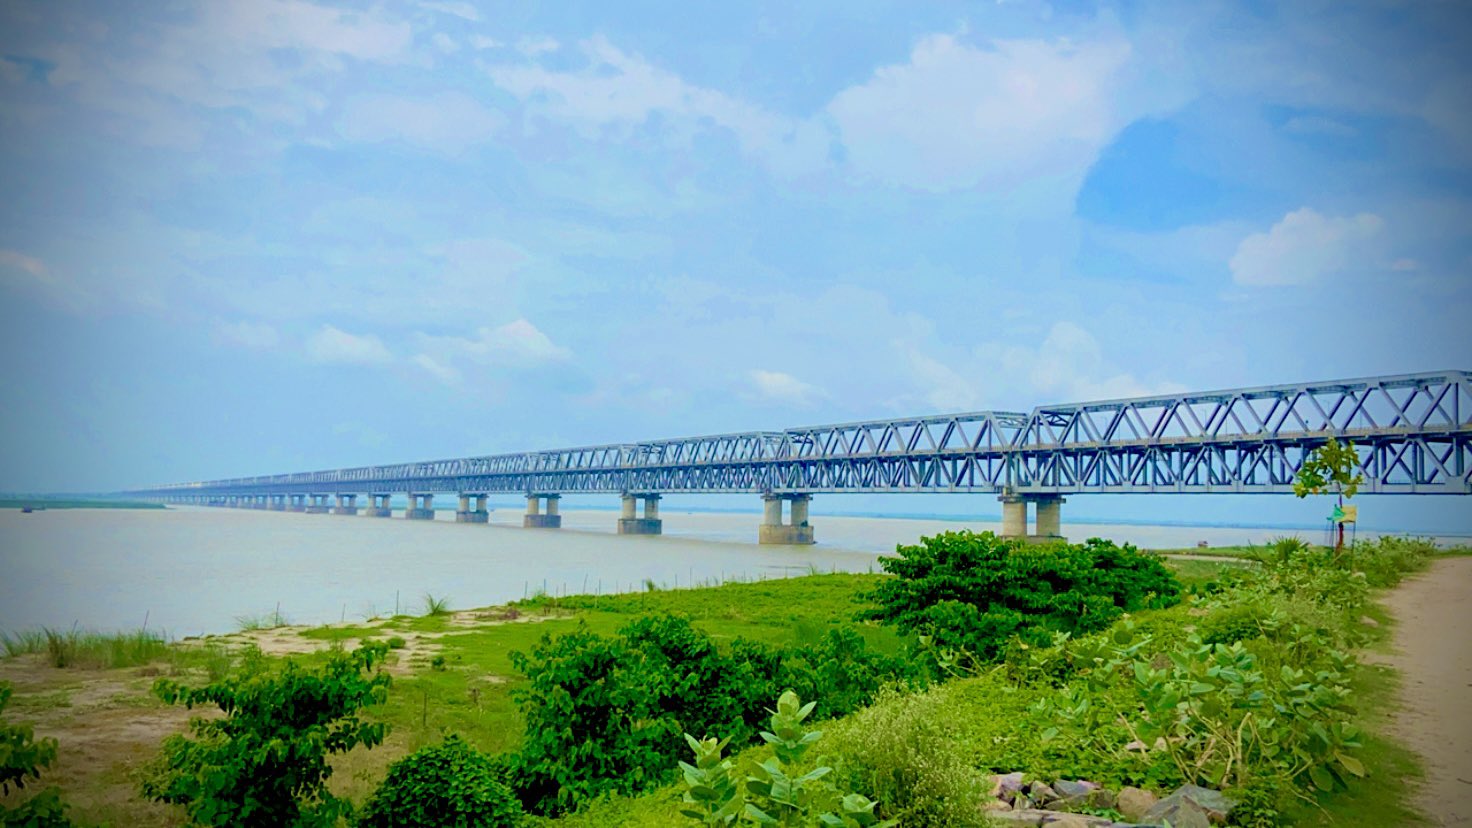 Cabinet approves construction of New 4.56 km long, 6-Lane Bridge across River Ganga connecting Digha and Sonepur in Bihar